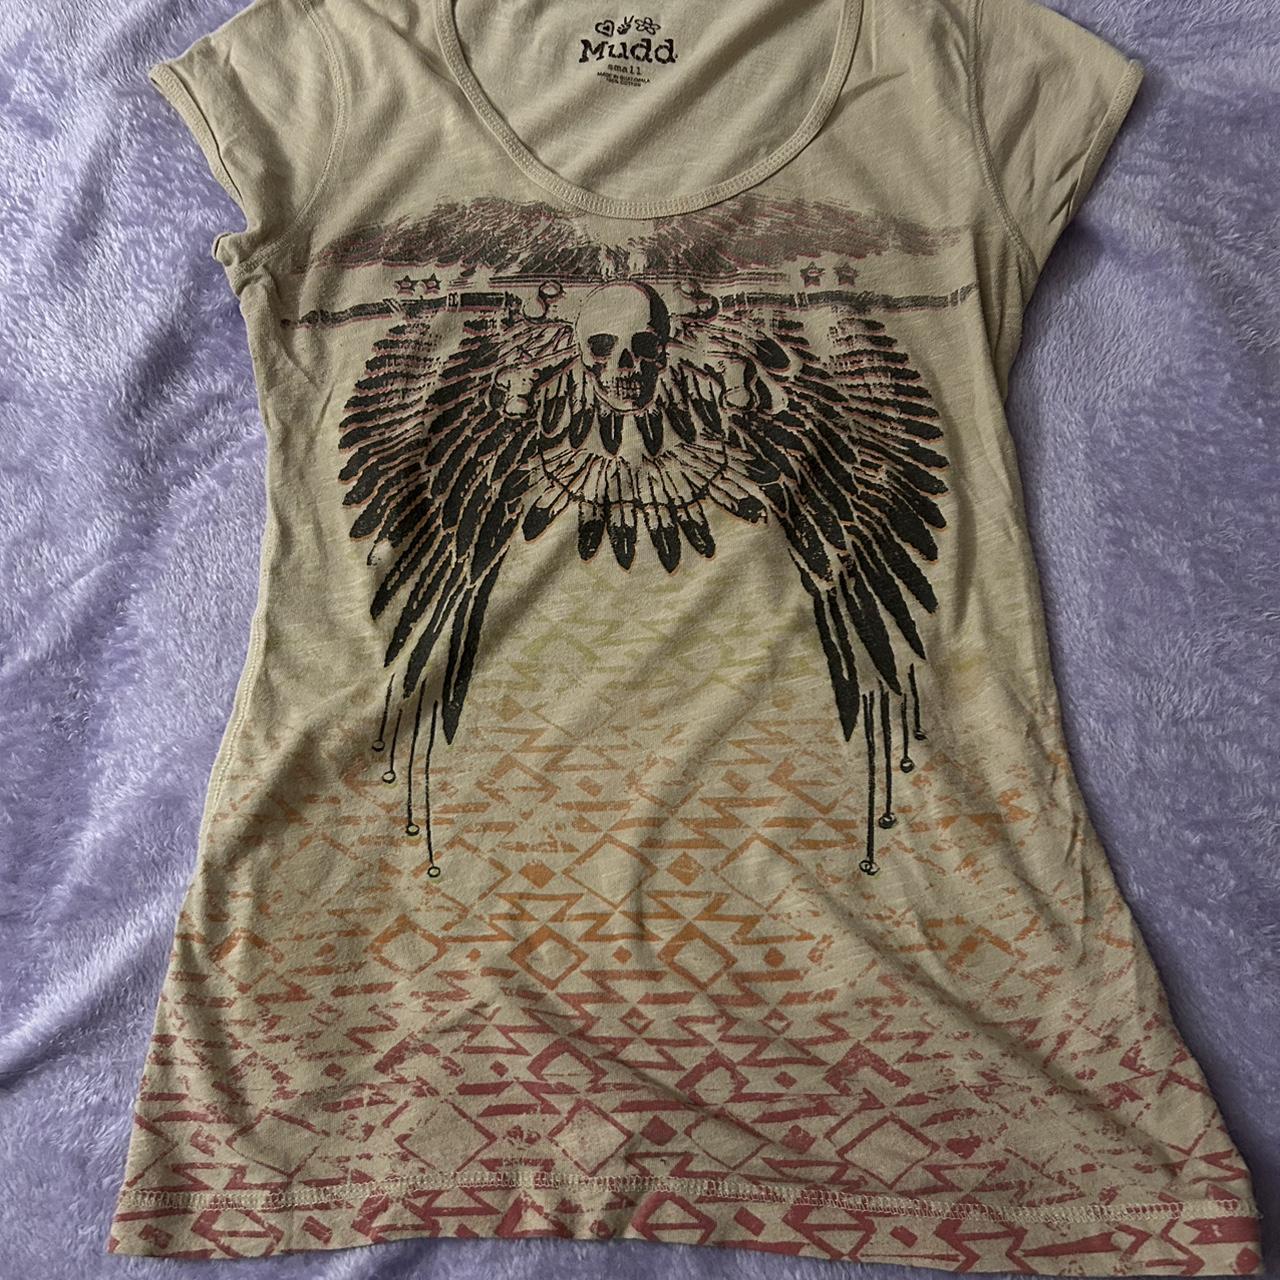 item listed by thriftqueen16